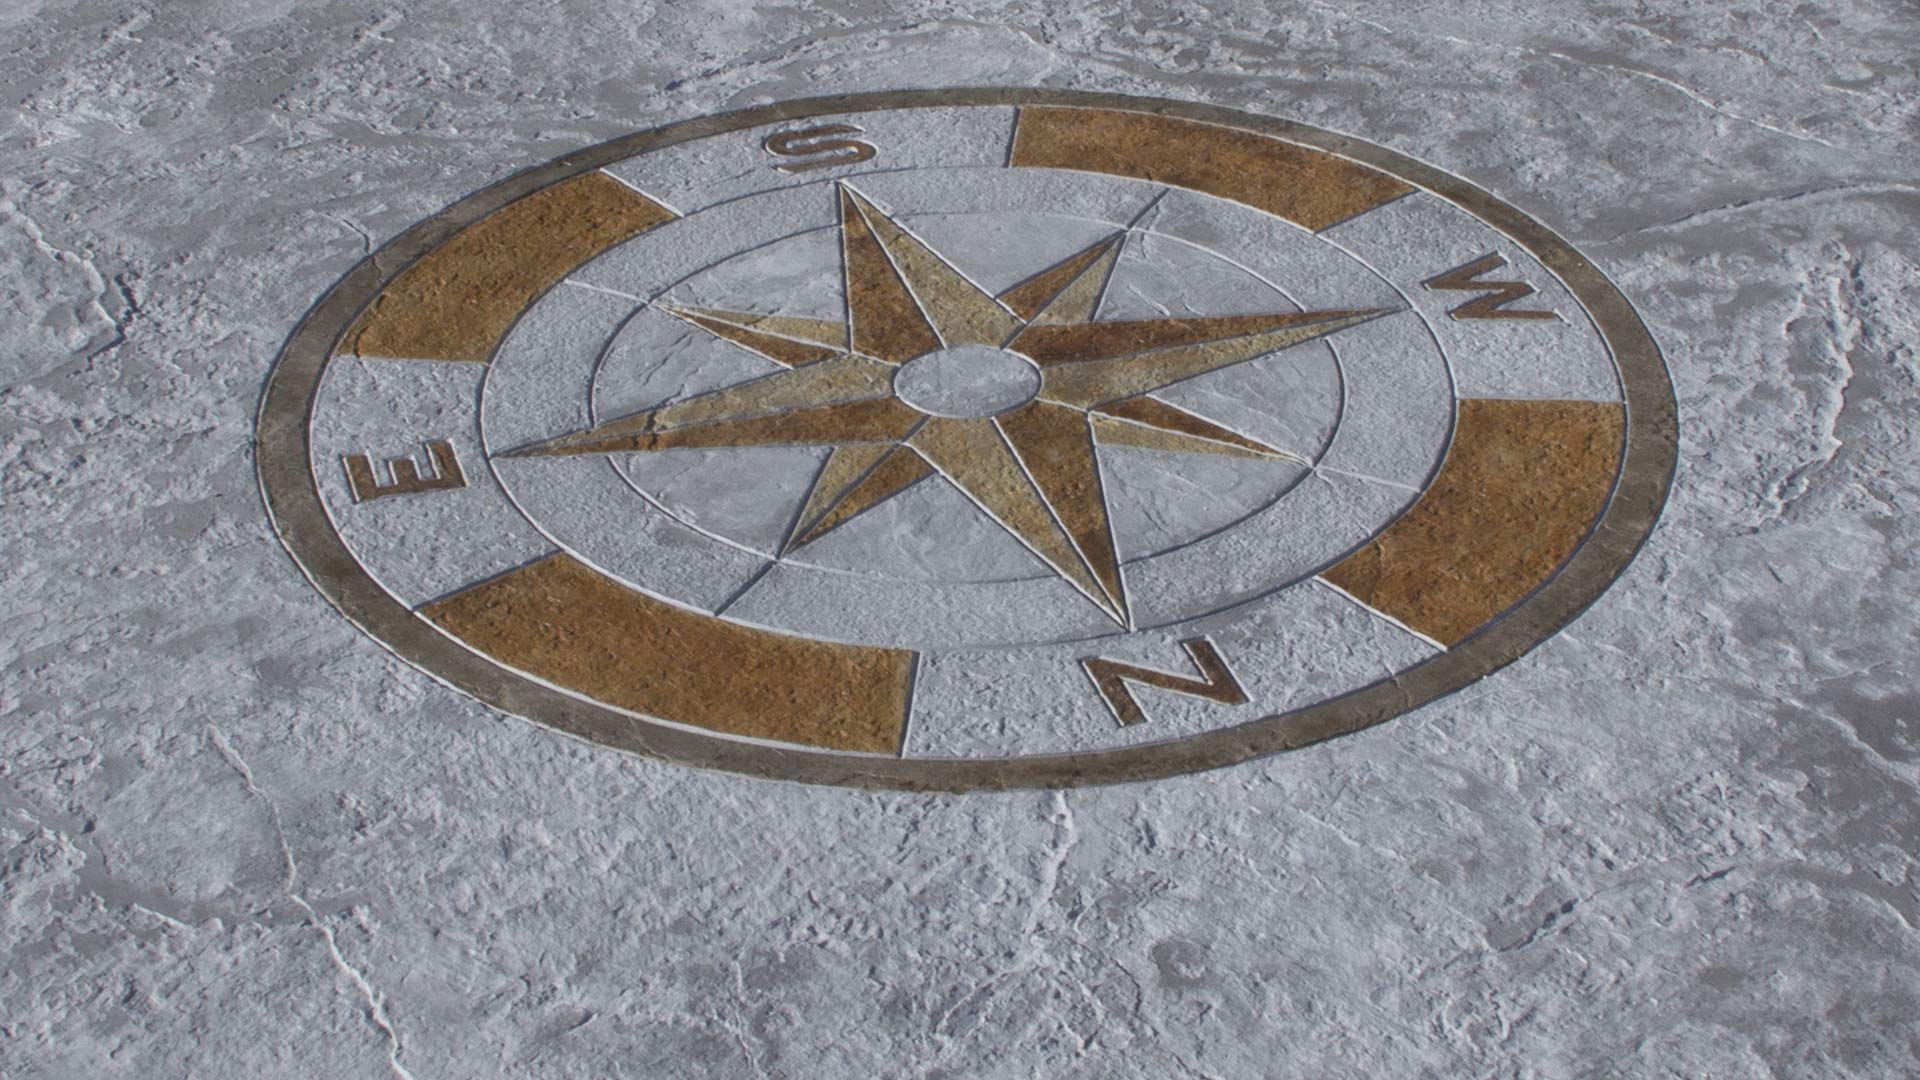 imprinted pavement with white and gold compass rose mold